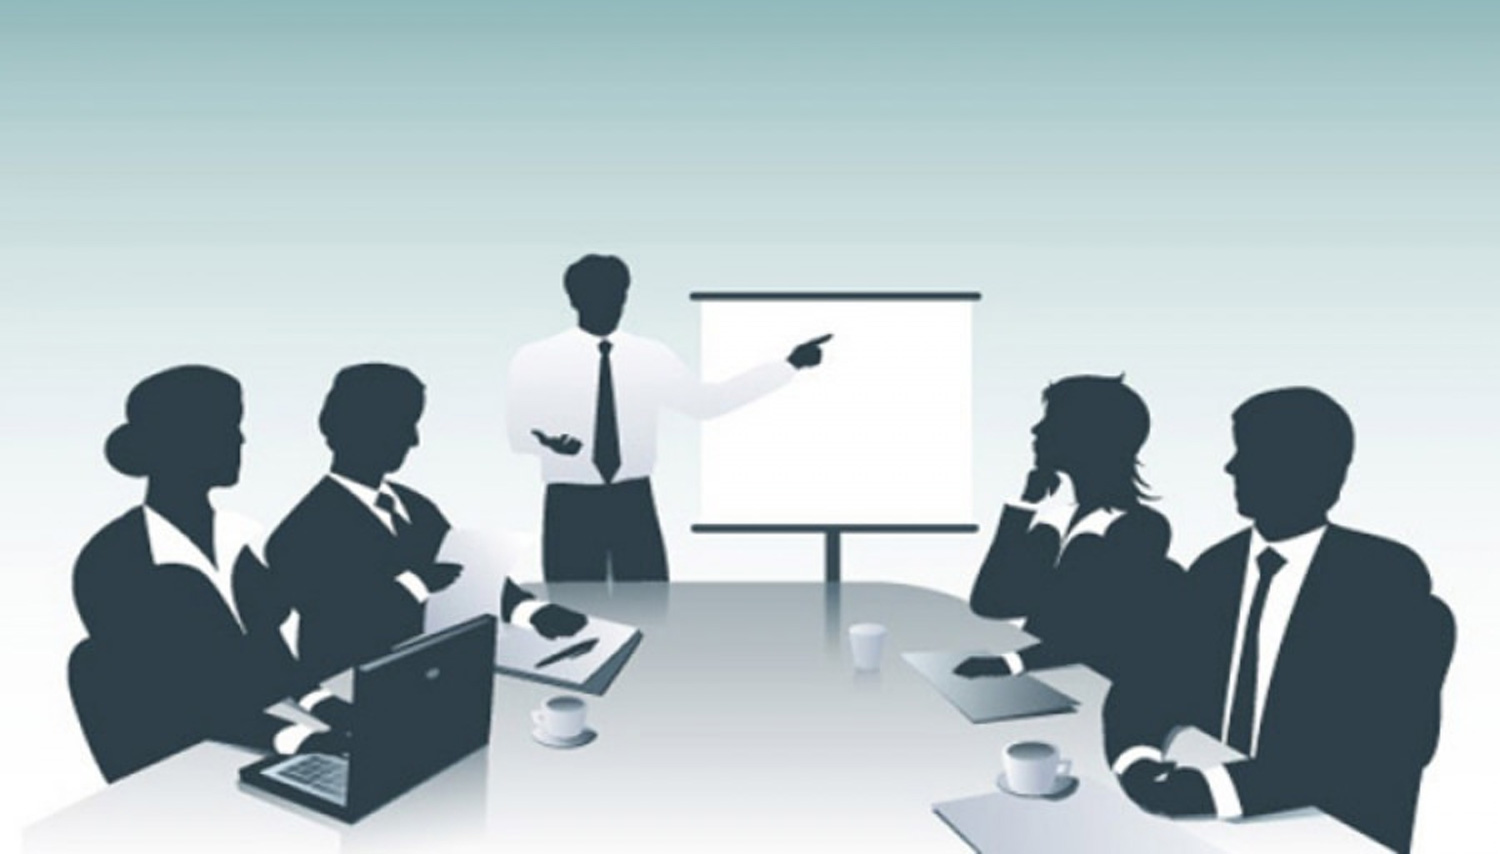 5 Tips for an Effective PowerPoint Presentation